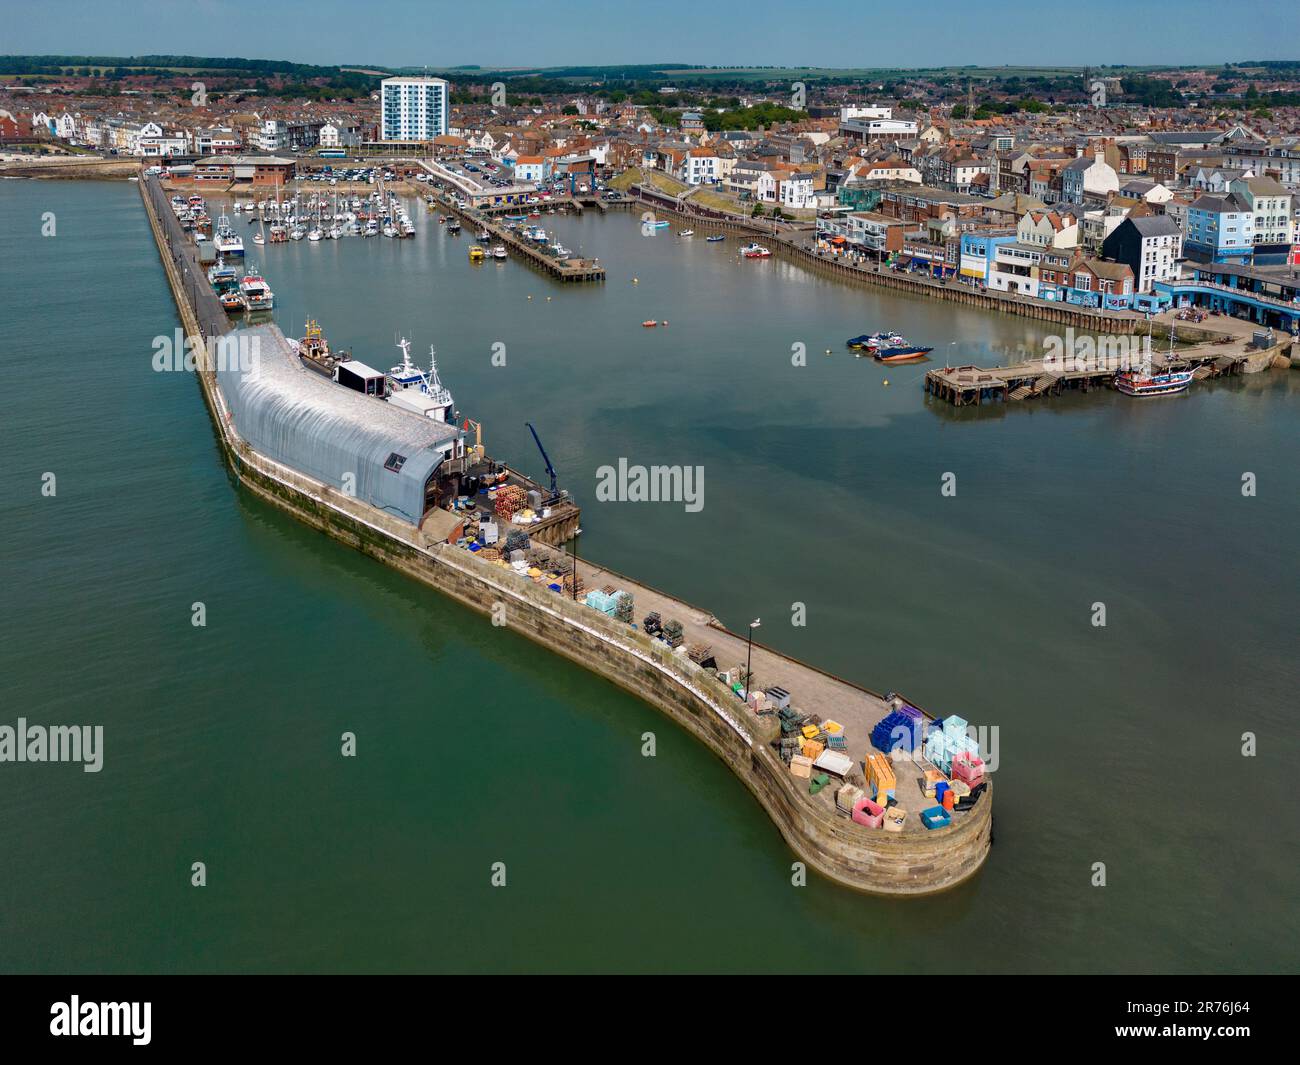 Aerial view of the harbor at Bridlington on the North Yorkshire coast in the United Kingdom. Stock Photo